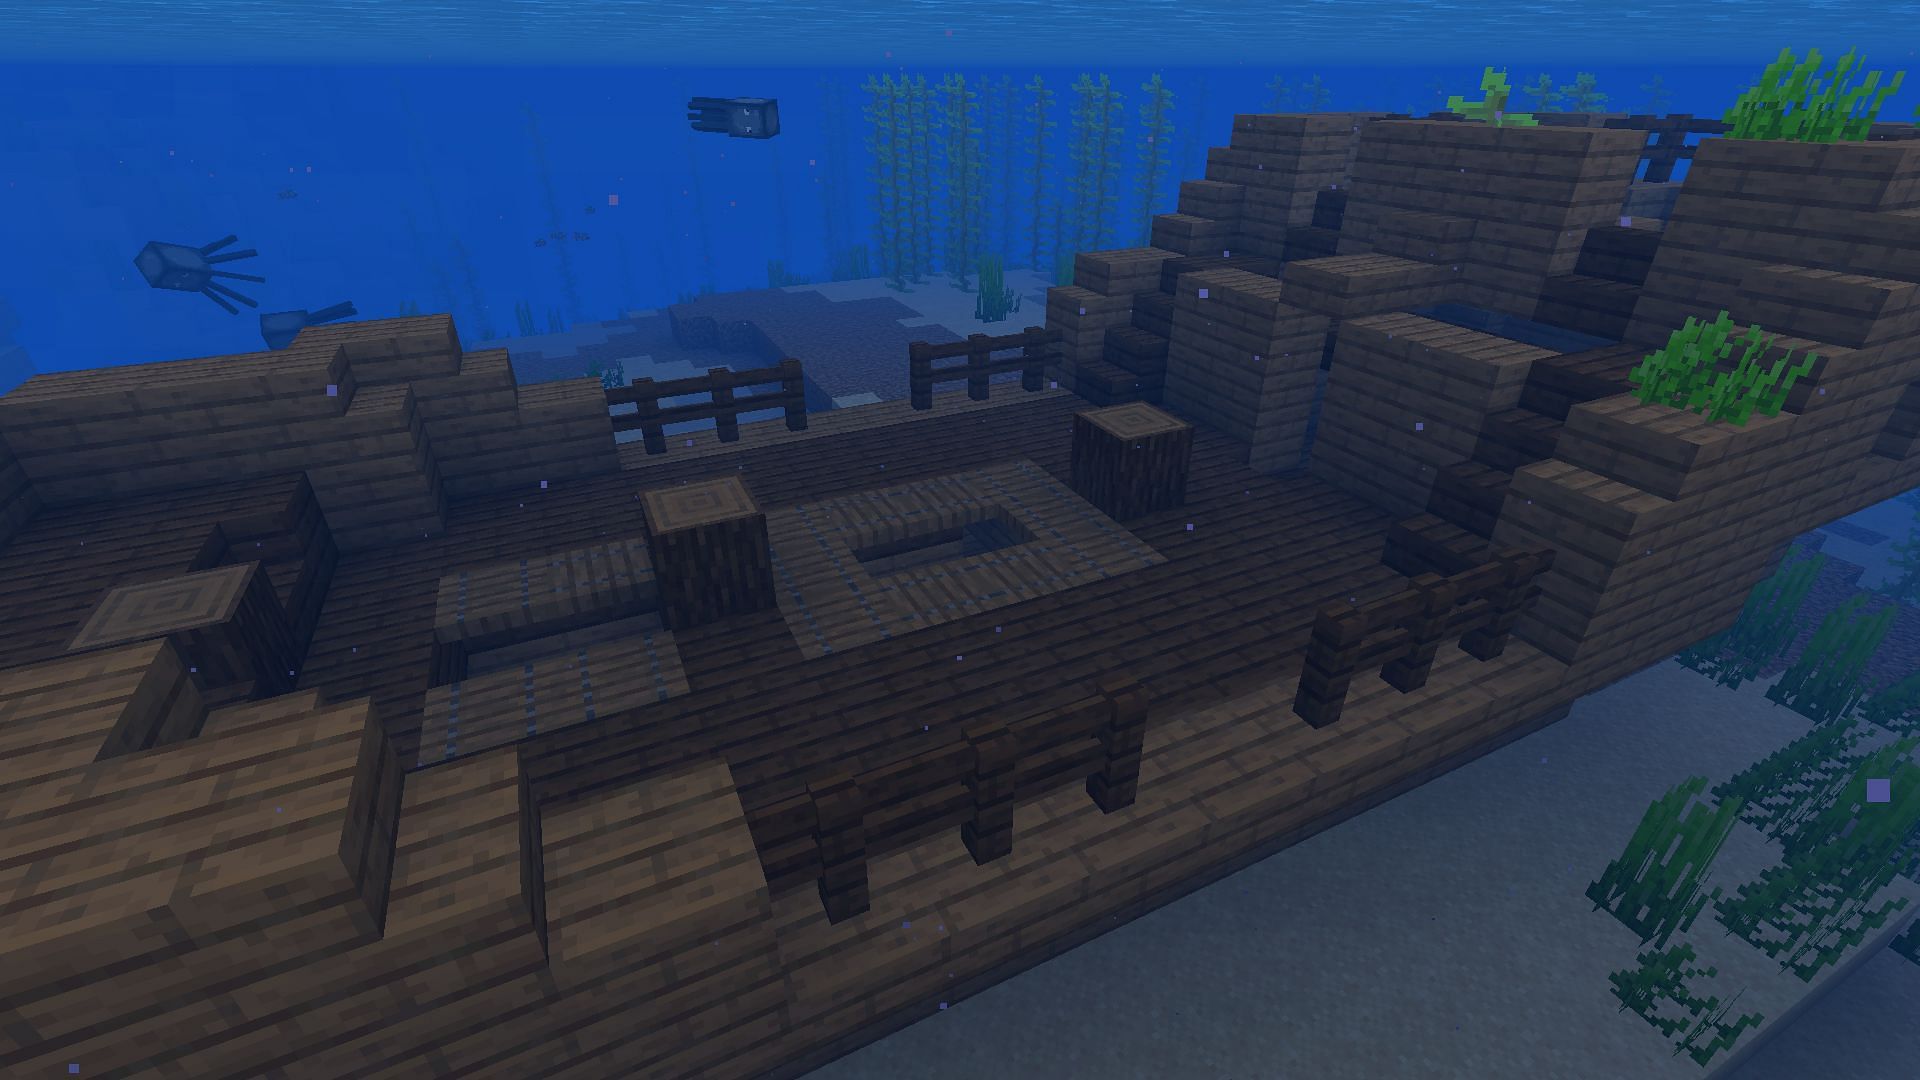 An example of a shipwreck in a shallow ocean (Image via Minecraft)